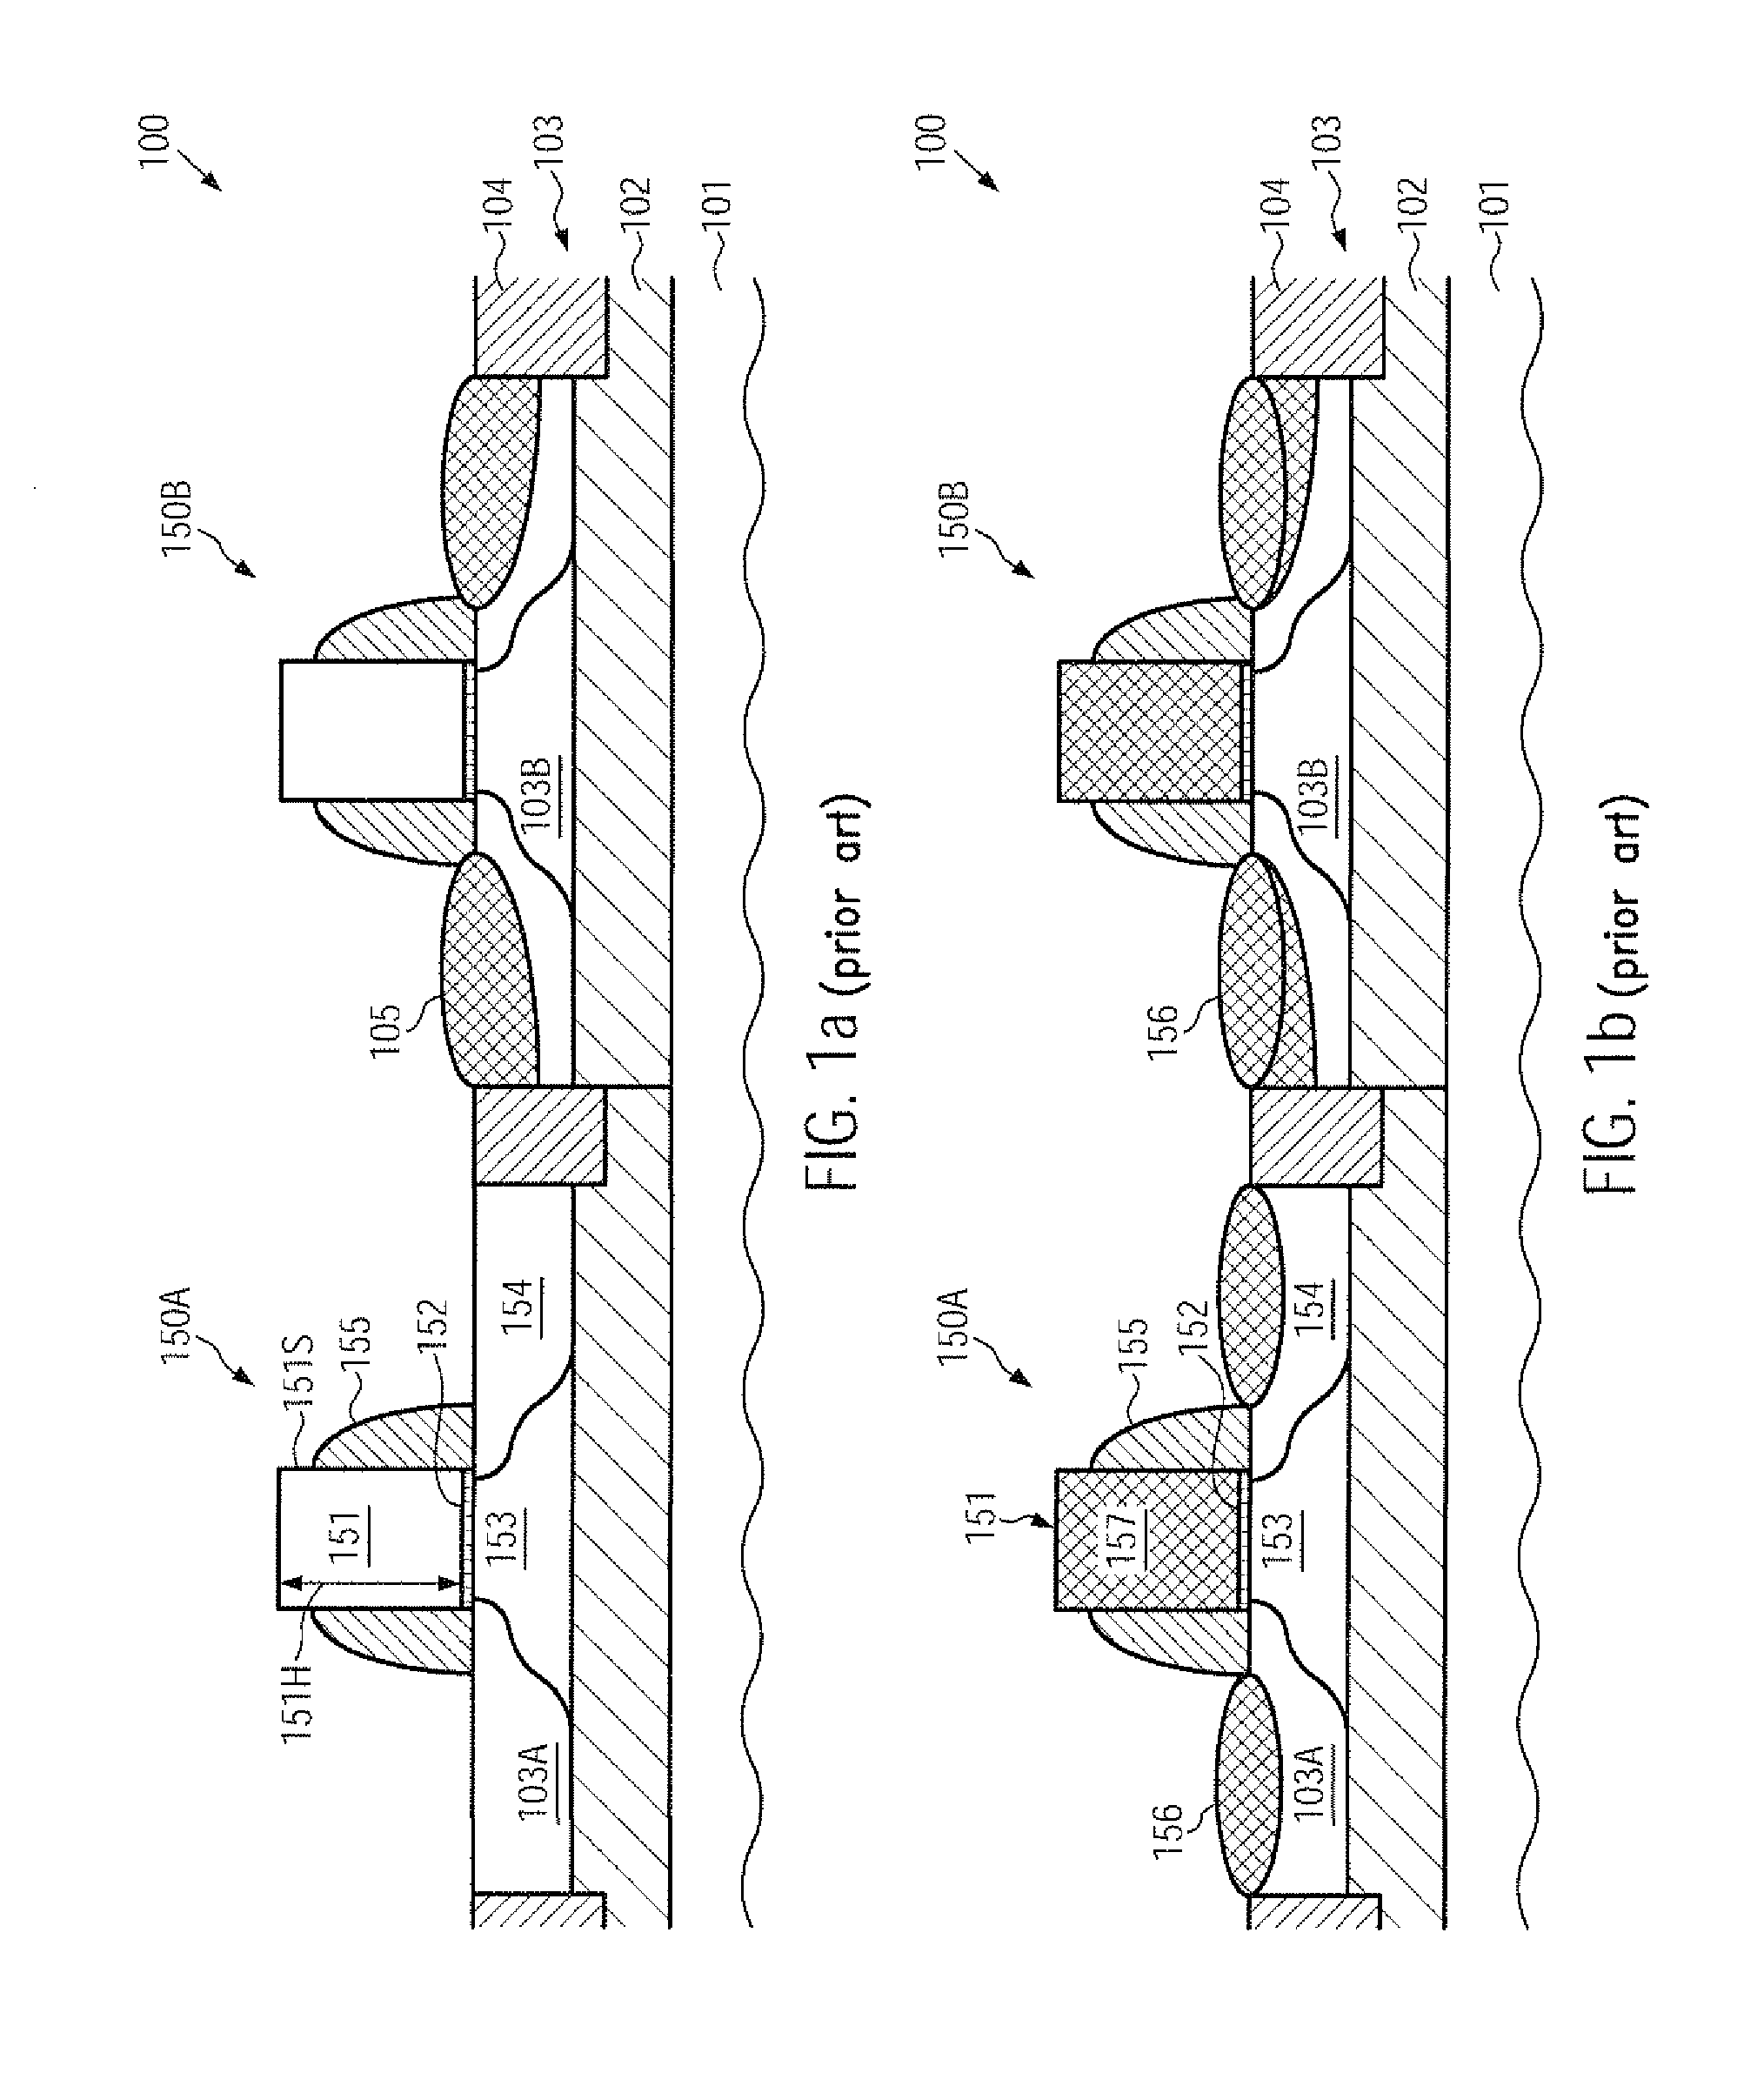 Recessed drain and source areas in combination with advanced silicide formation in transistors